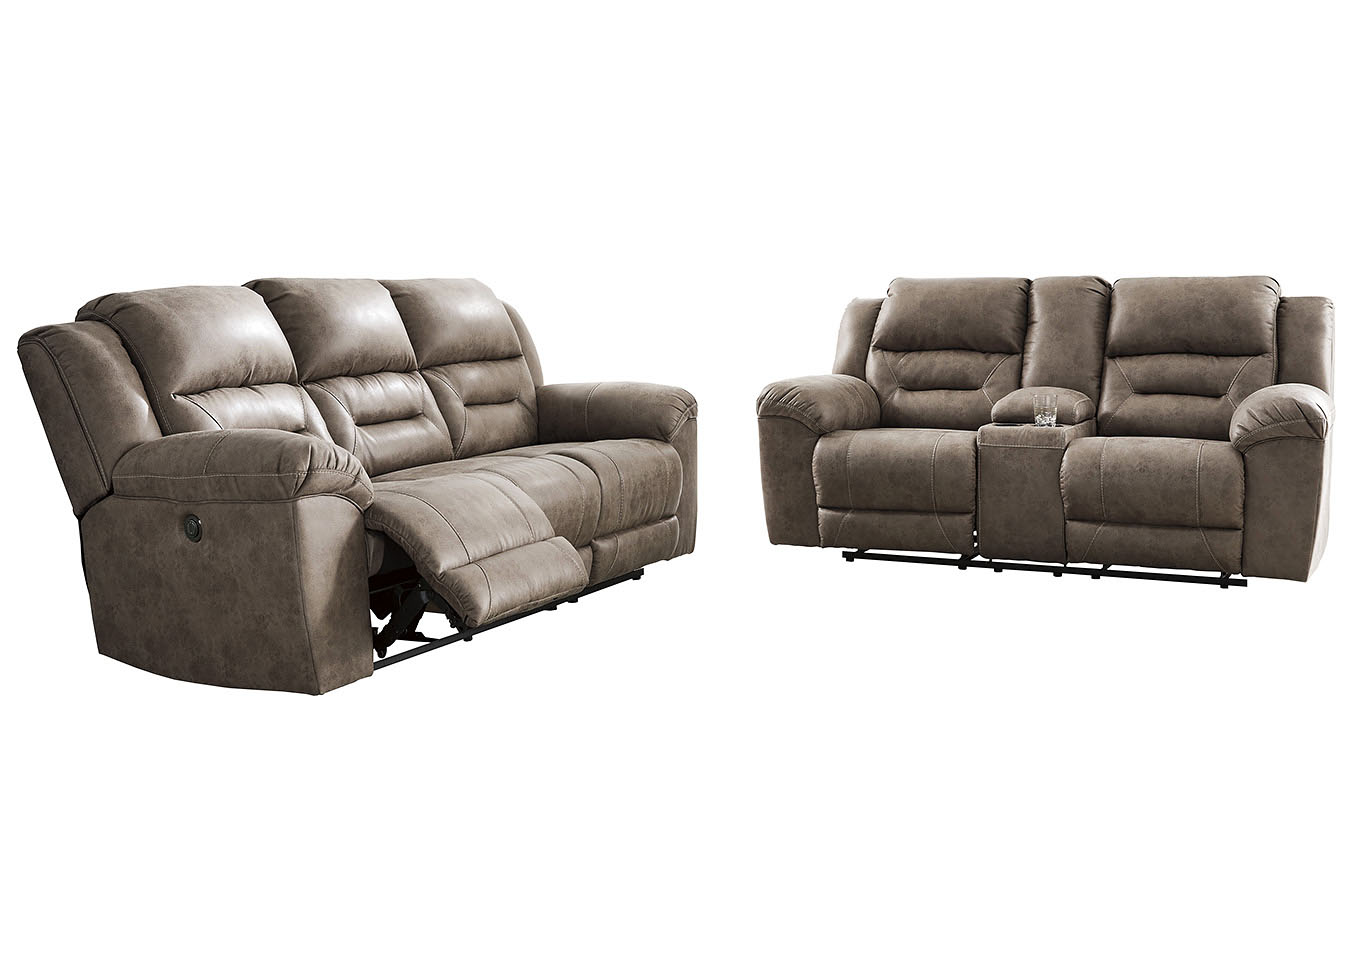 Stoneland Gray Power Reclining Sofa And, Best Leather Power Reclining Sofa